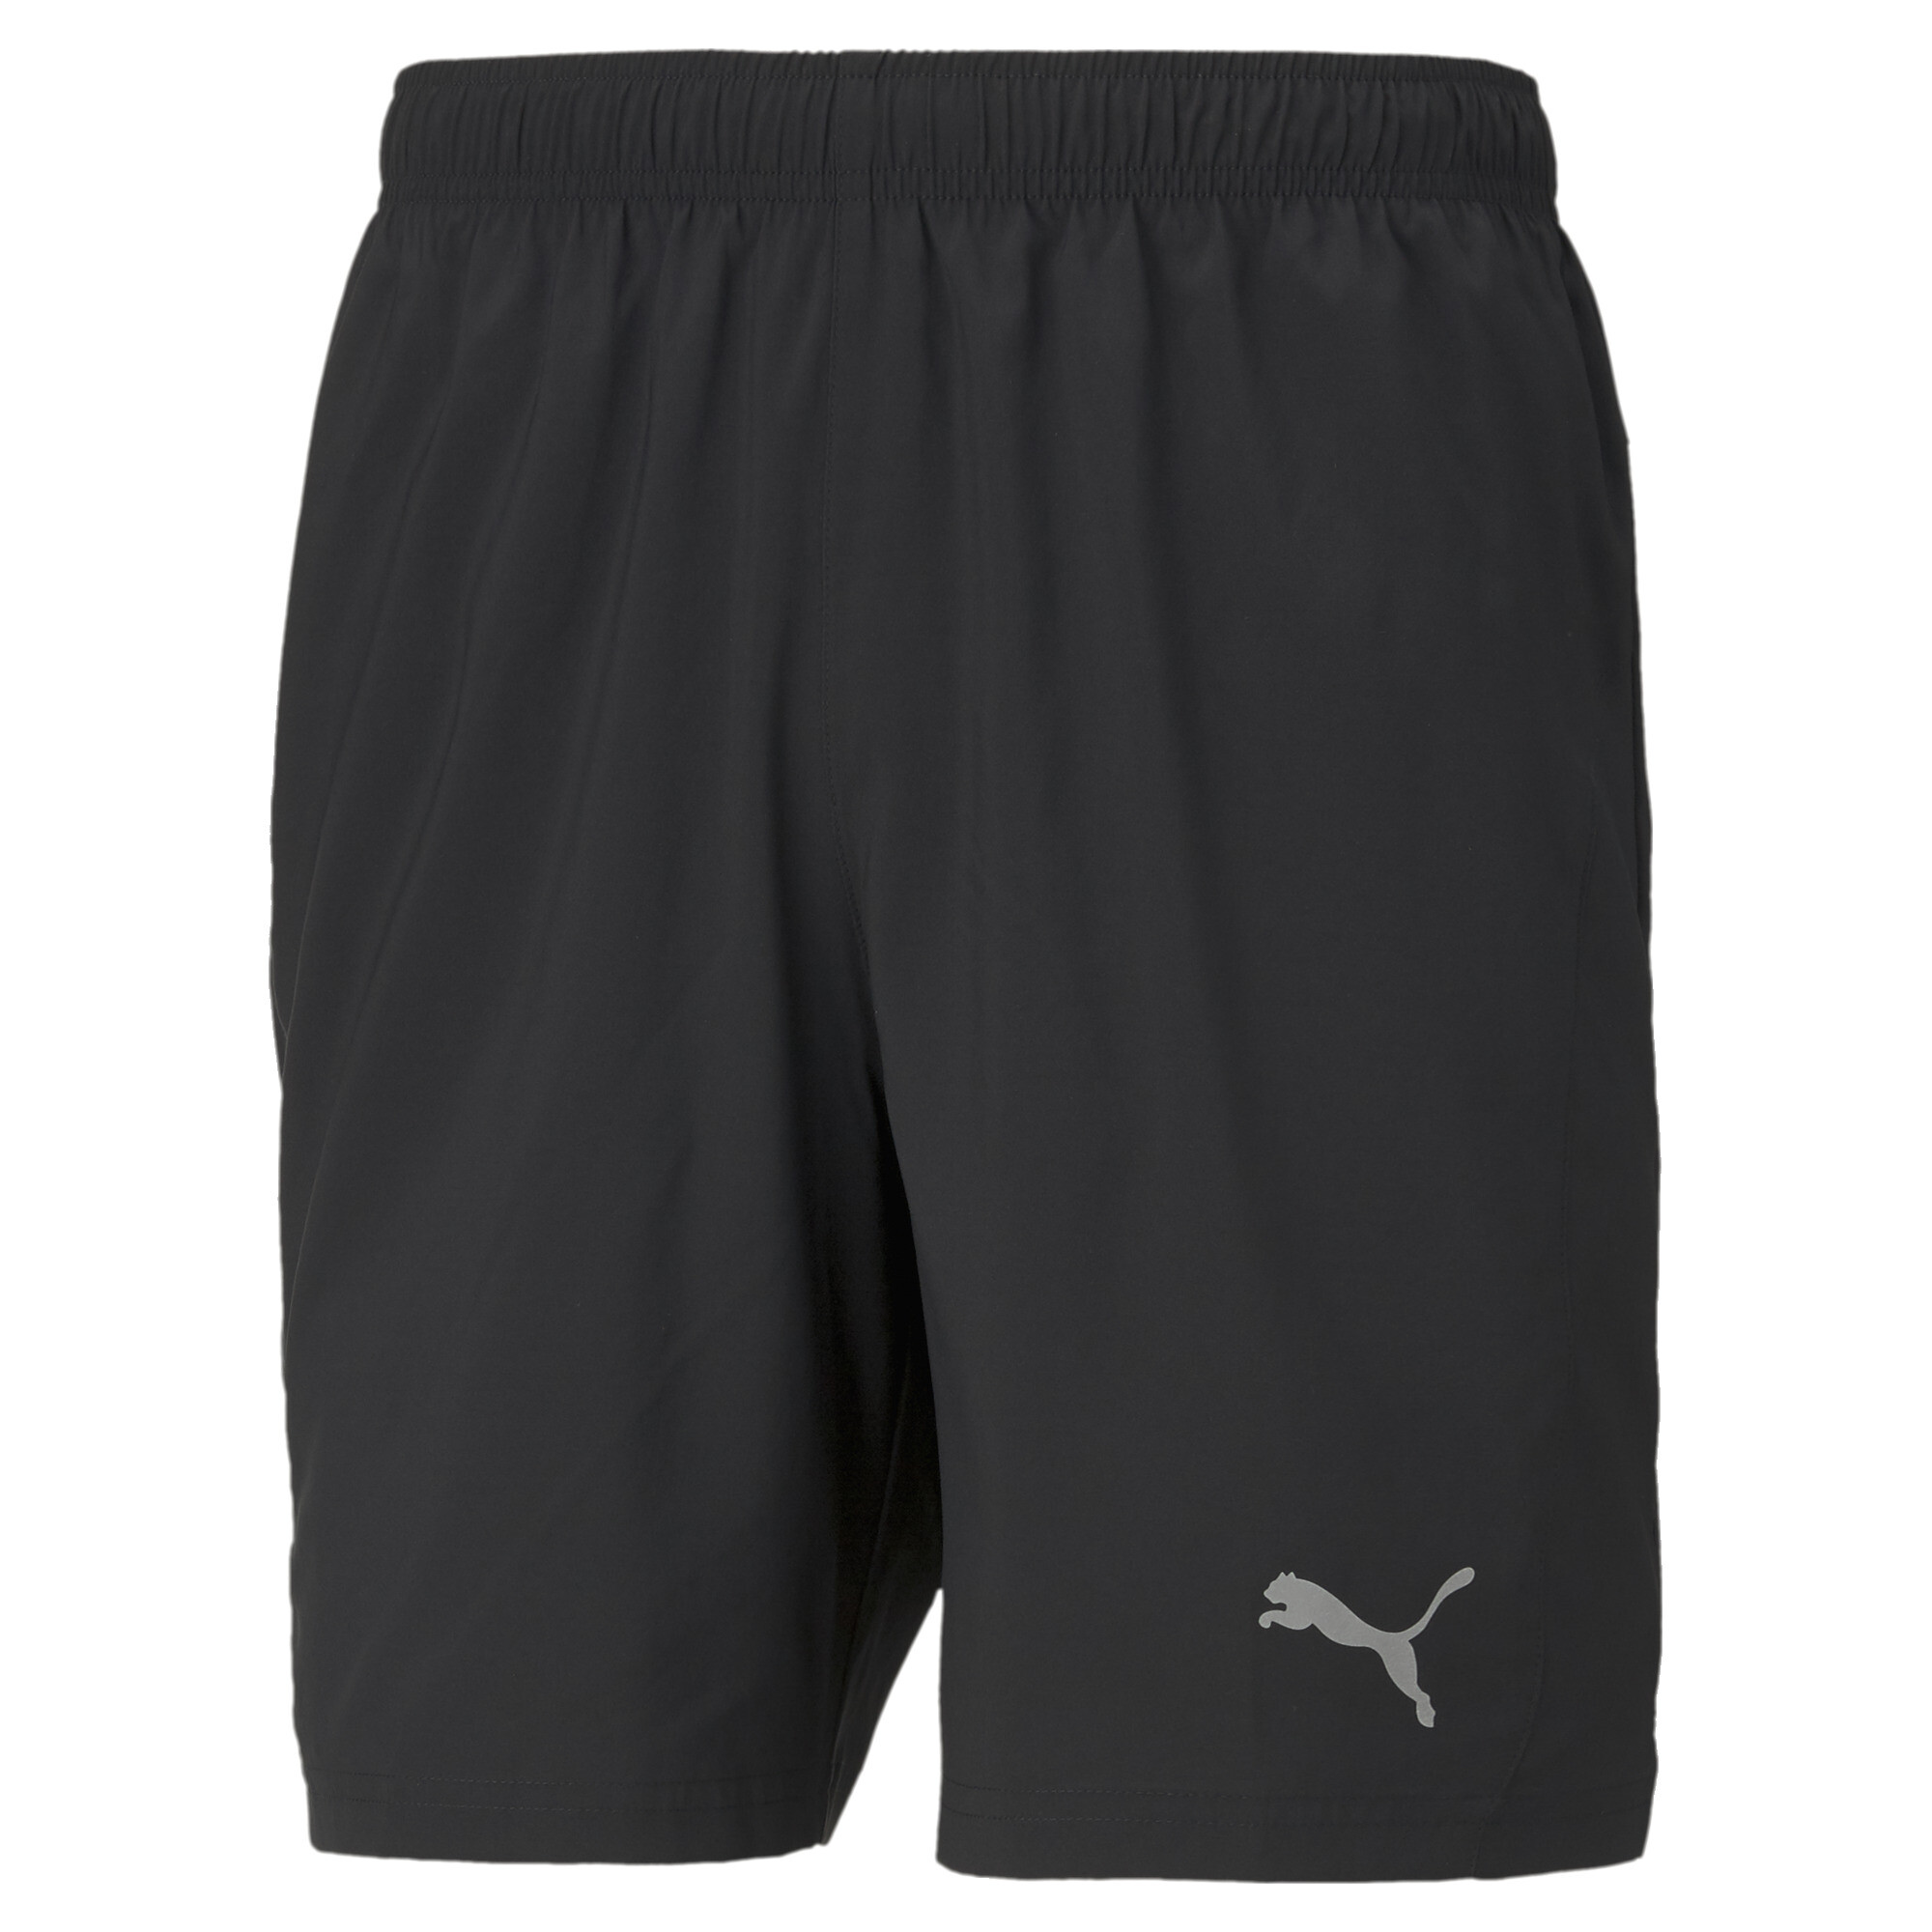 Men's PUMA Favourite Woven 7 Session Running Shorts In Black, Size XS